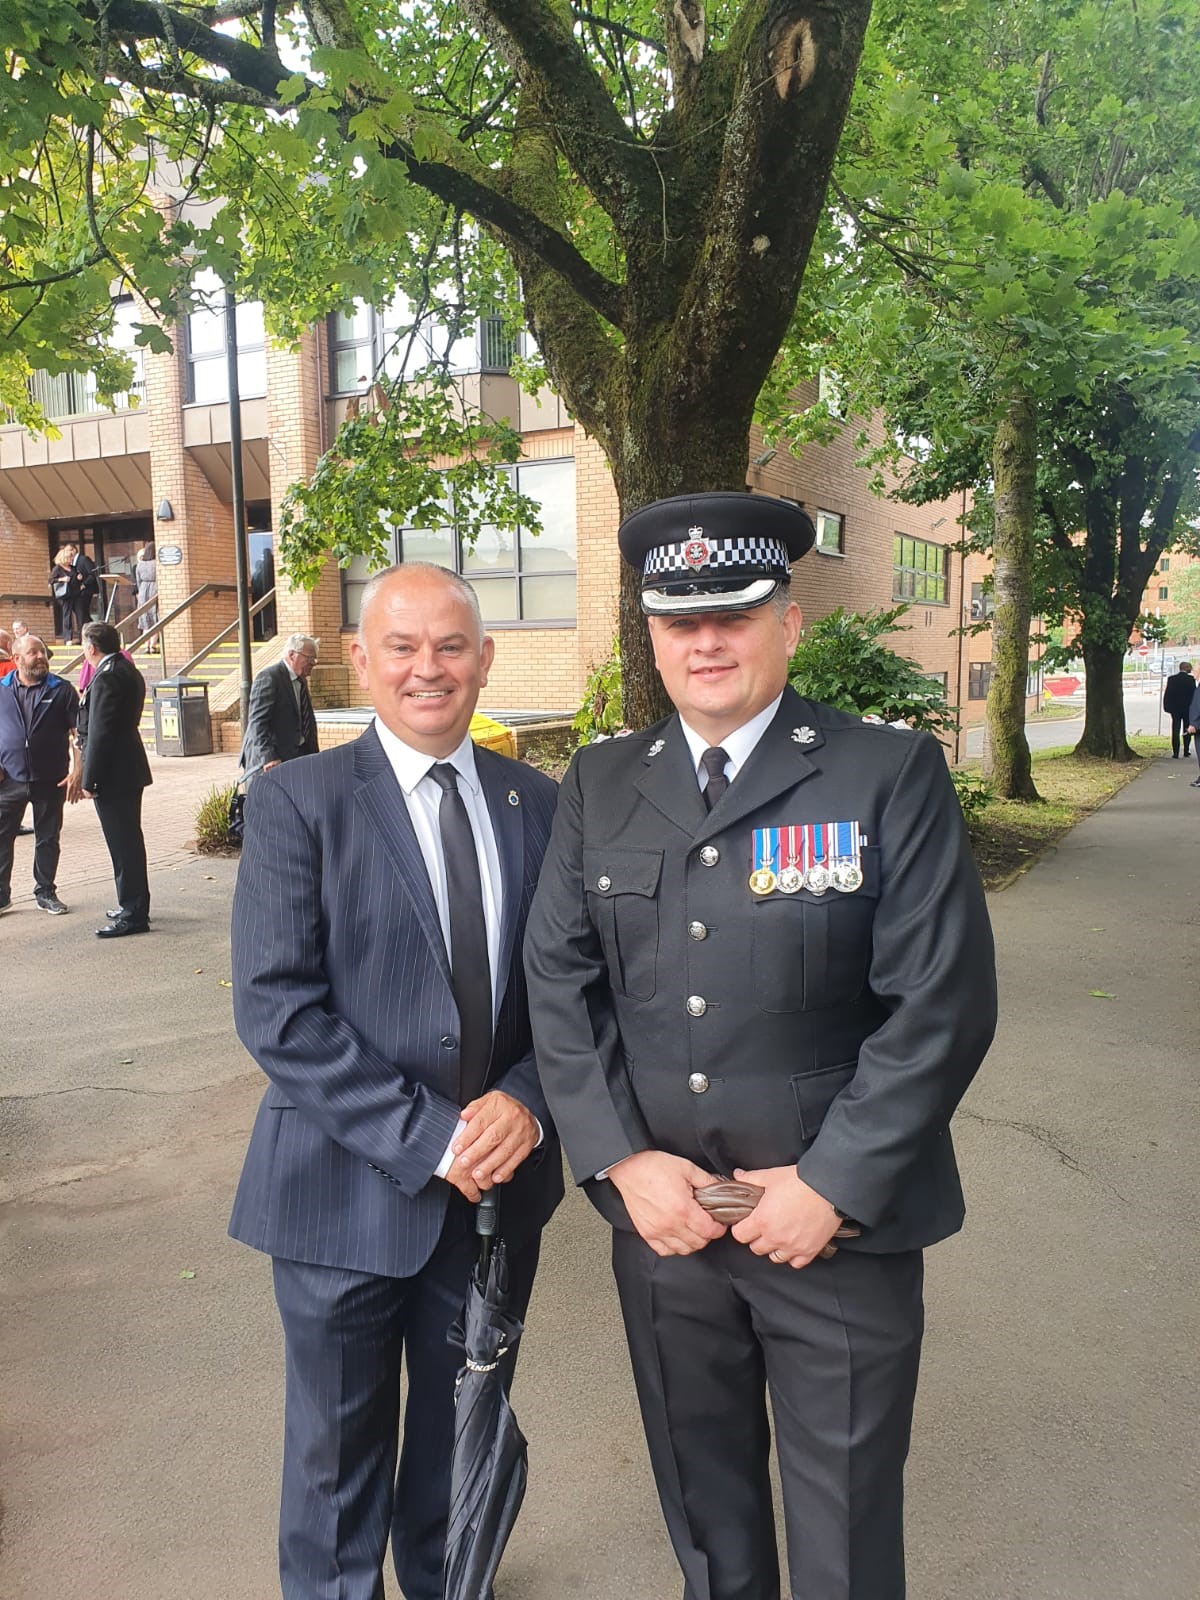 Jason Edwards was High Sheriff ofMid Glamorgan in 2020/2021. He's seen here with Chief Superintendent Stephen Jones of South Wales Police